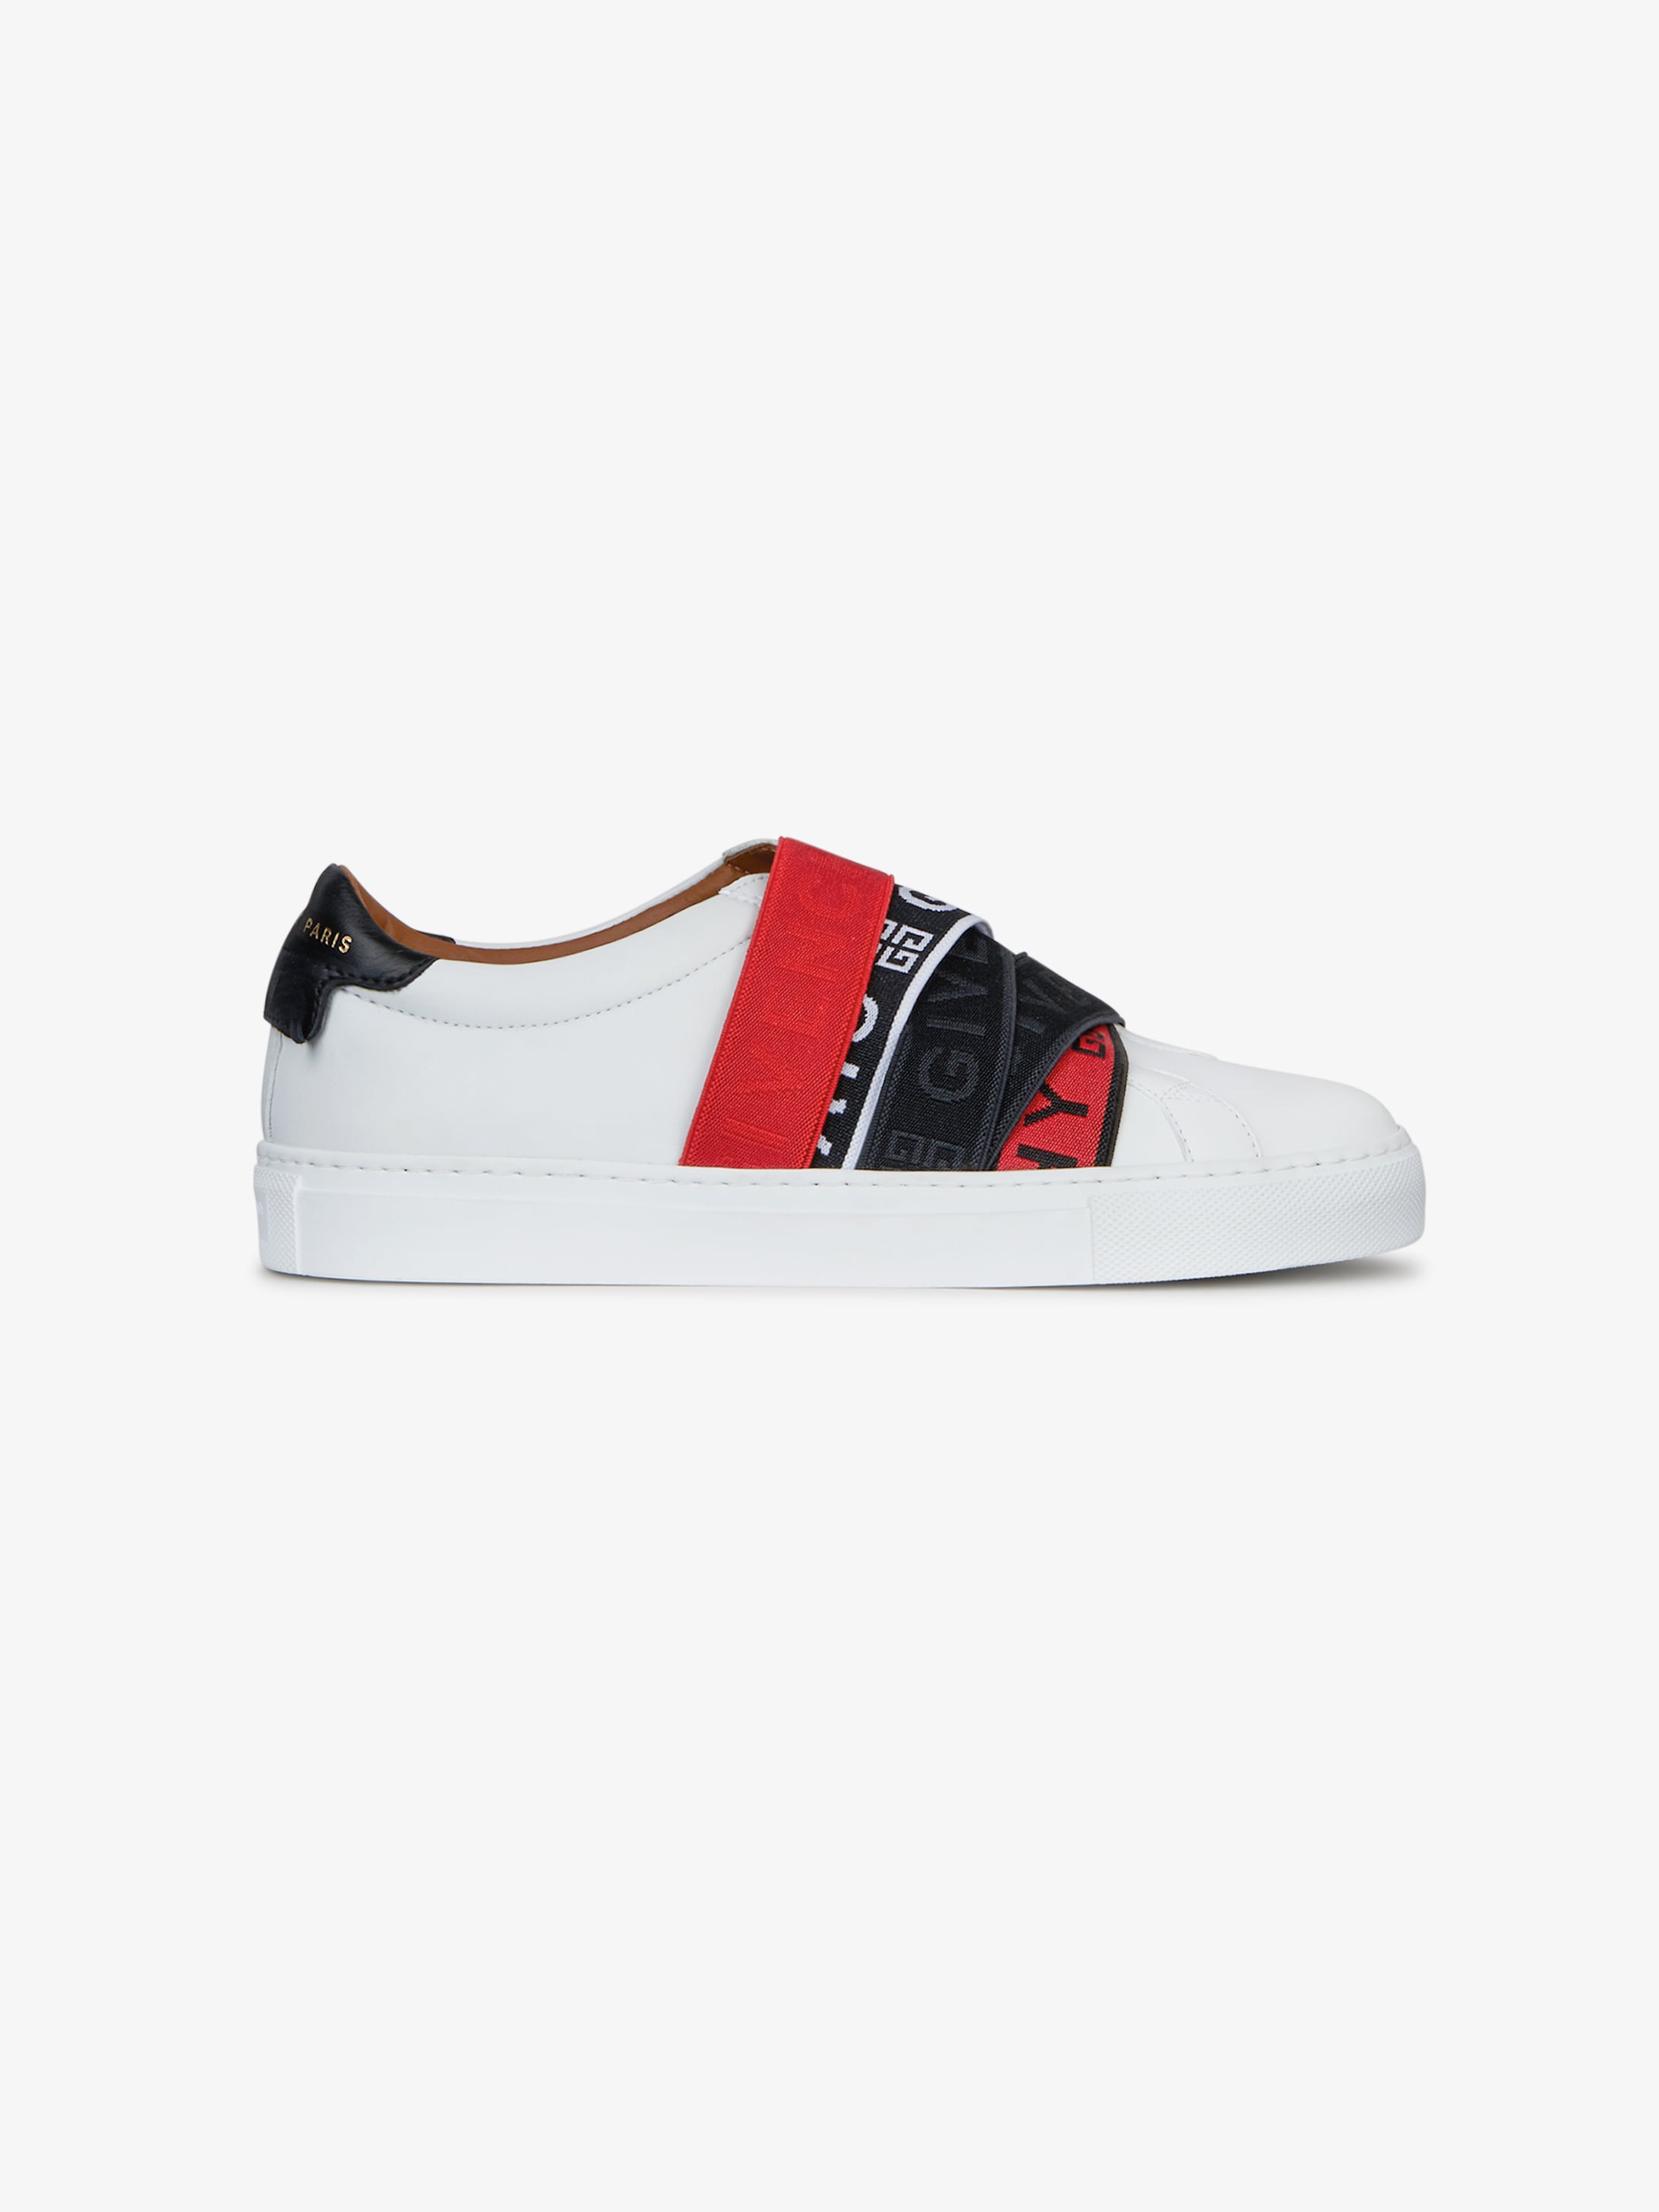 givenchy 4g webbing sneakers off 57 